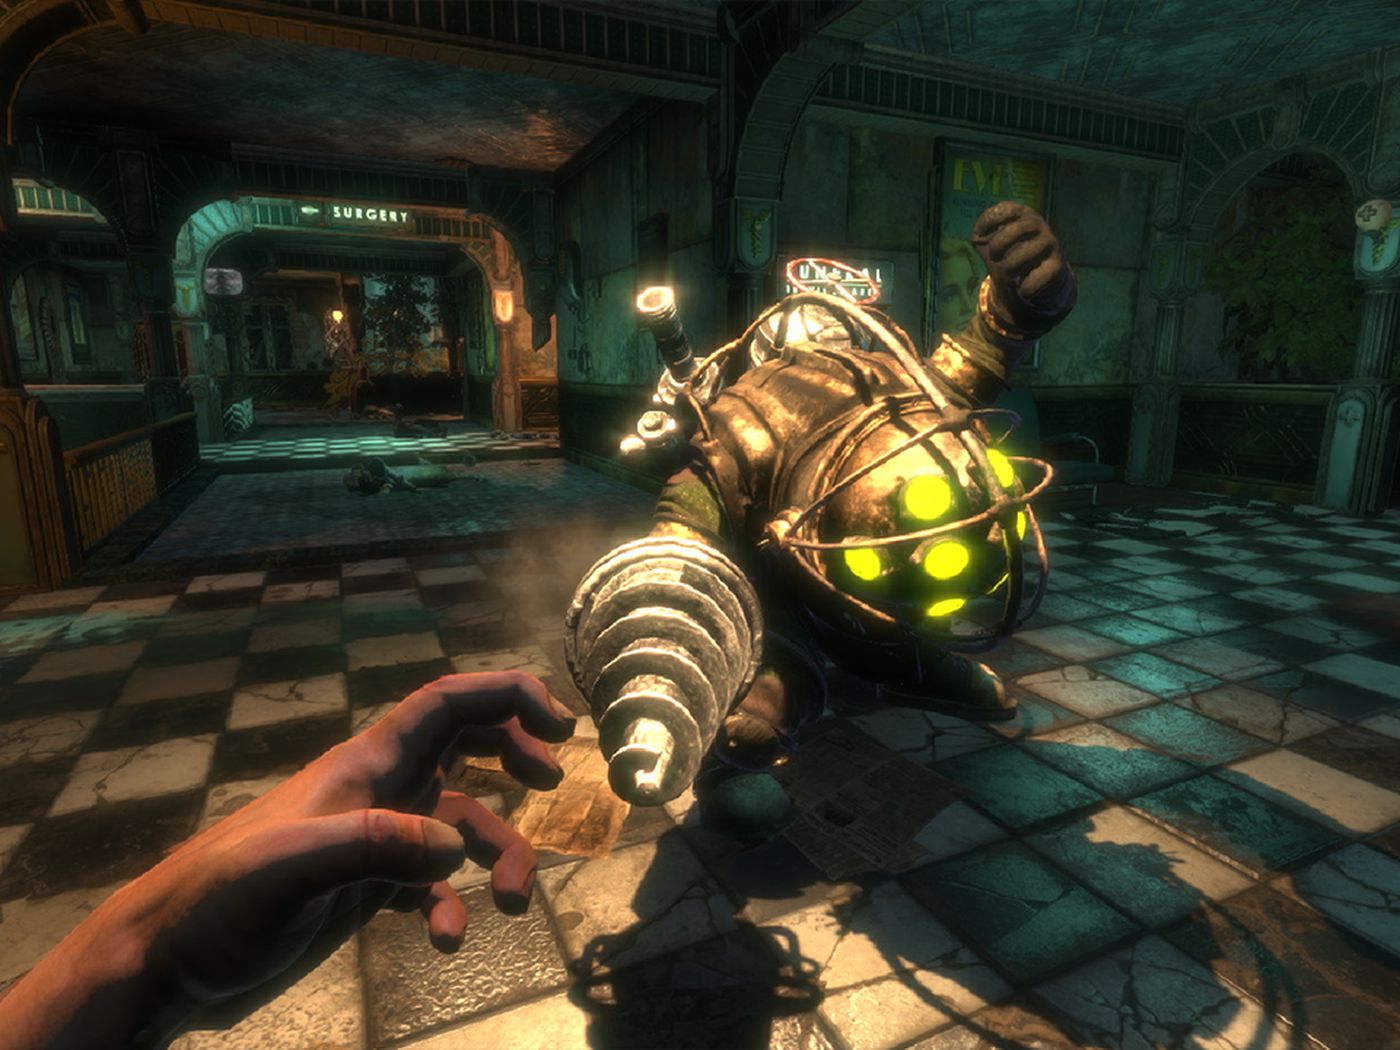 BioShock 4 Might Be Delayed After Reported "Issues" Gameranx